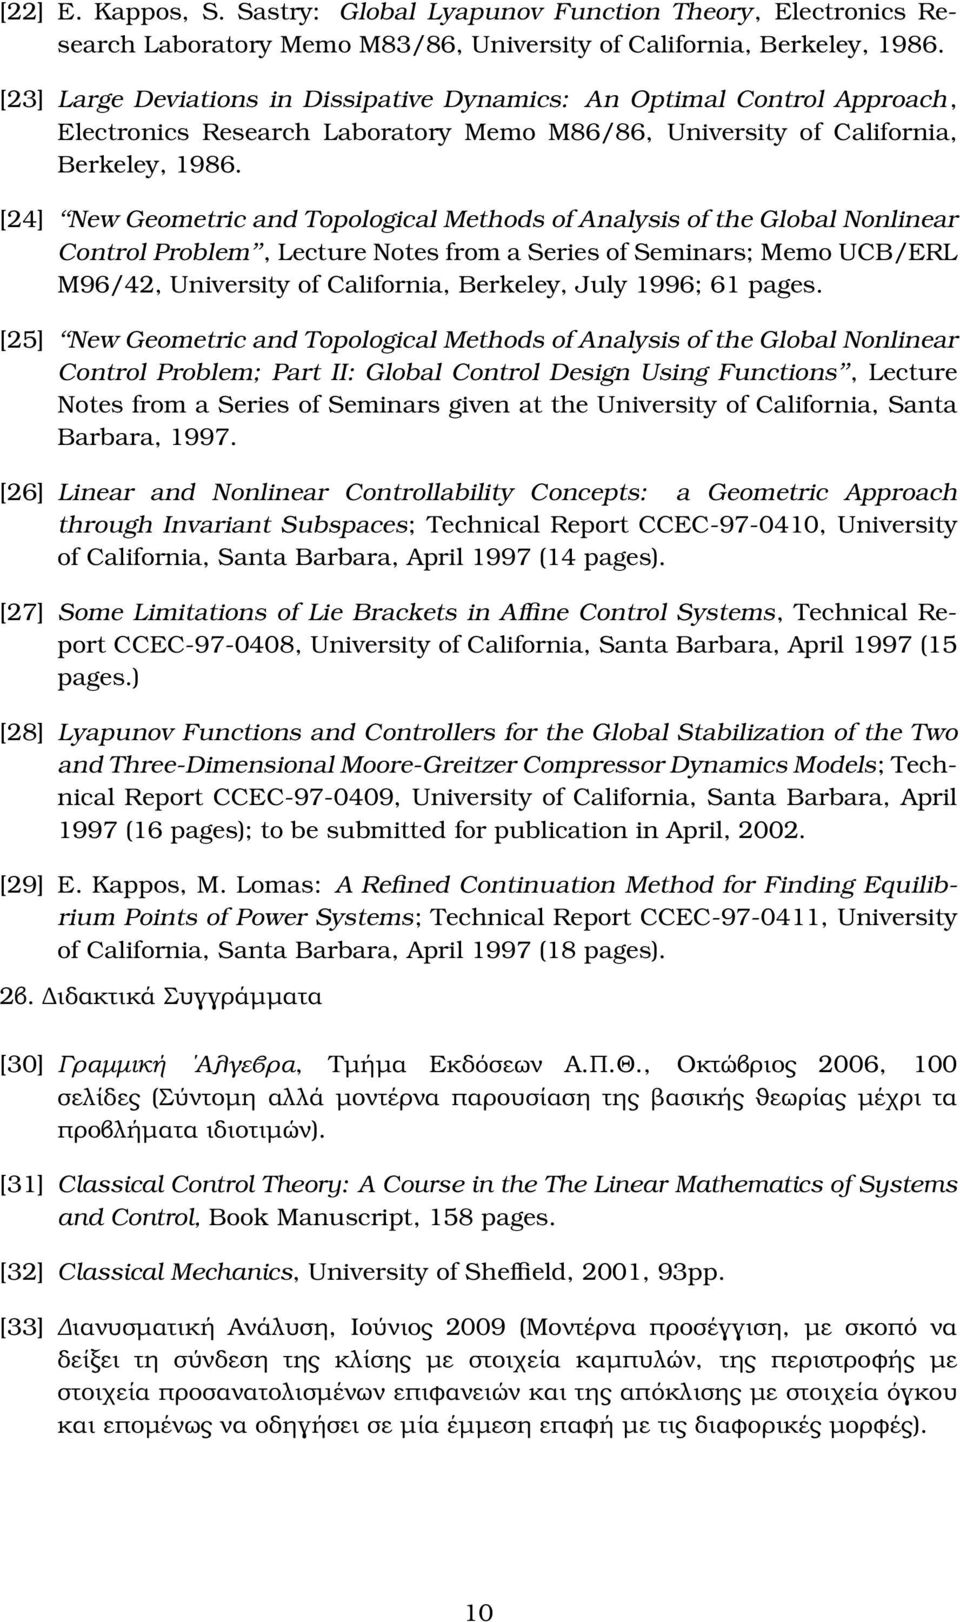 [24] New Geometric and Topological Methods of Analysis of the Global Nonlinear Control Problem, Lecture Notes from a Series of Seminars; Memo UCB/ERL M96/42, University of California, Berkeley, July